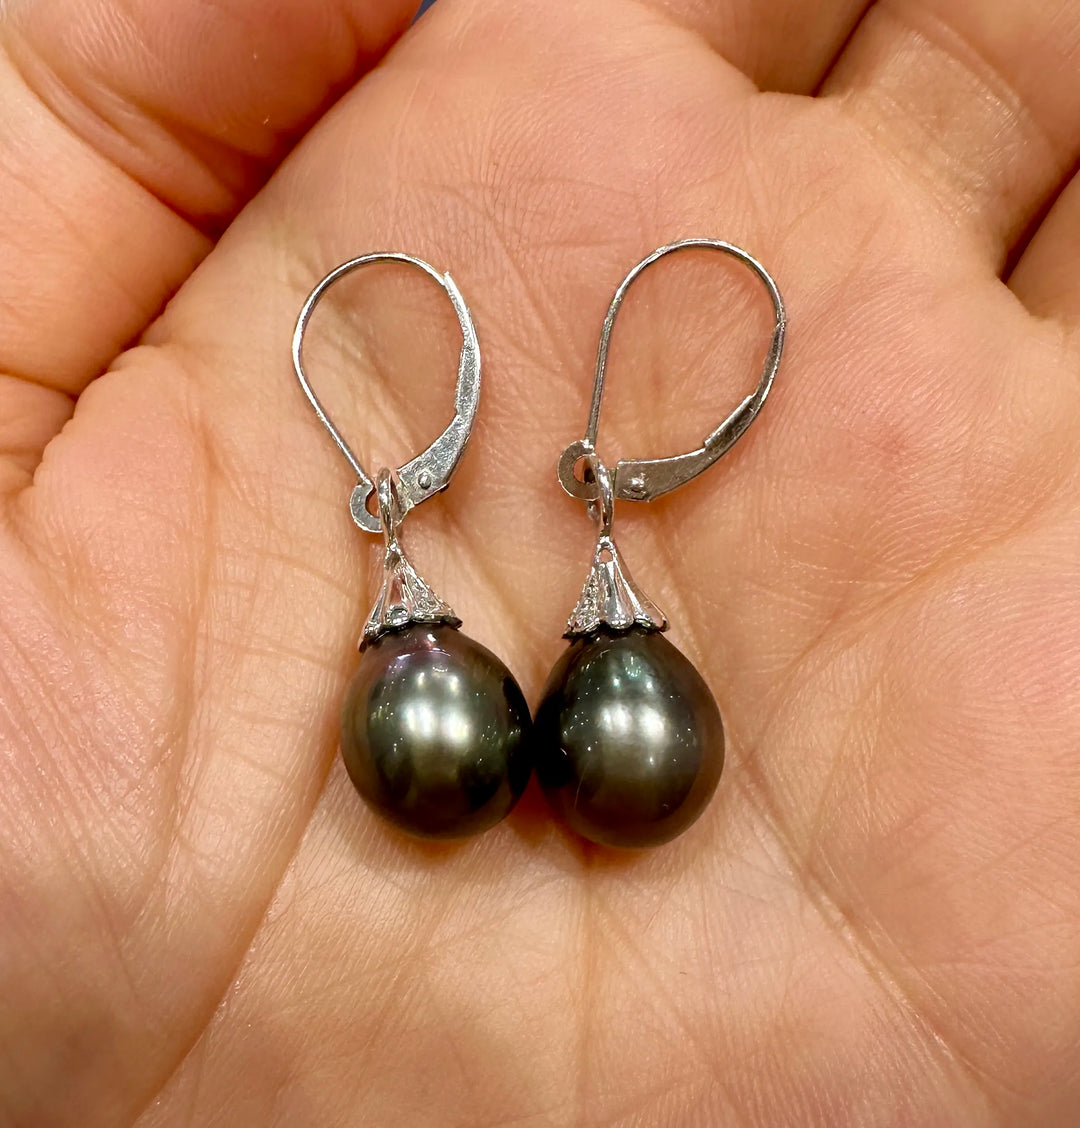 A pair of Tahitian dark green drop-shaped pearl earrings with small diamonds on 14K white gold.